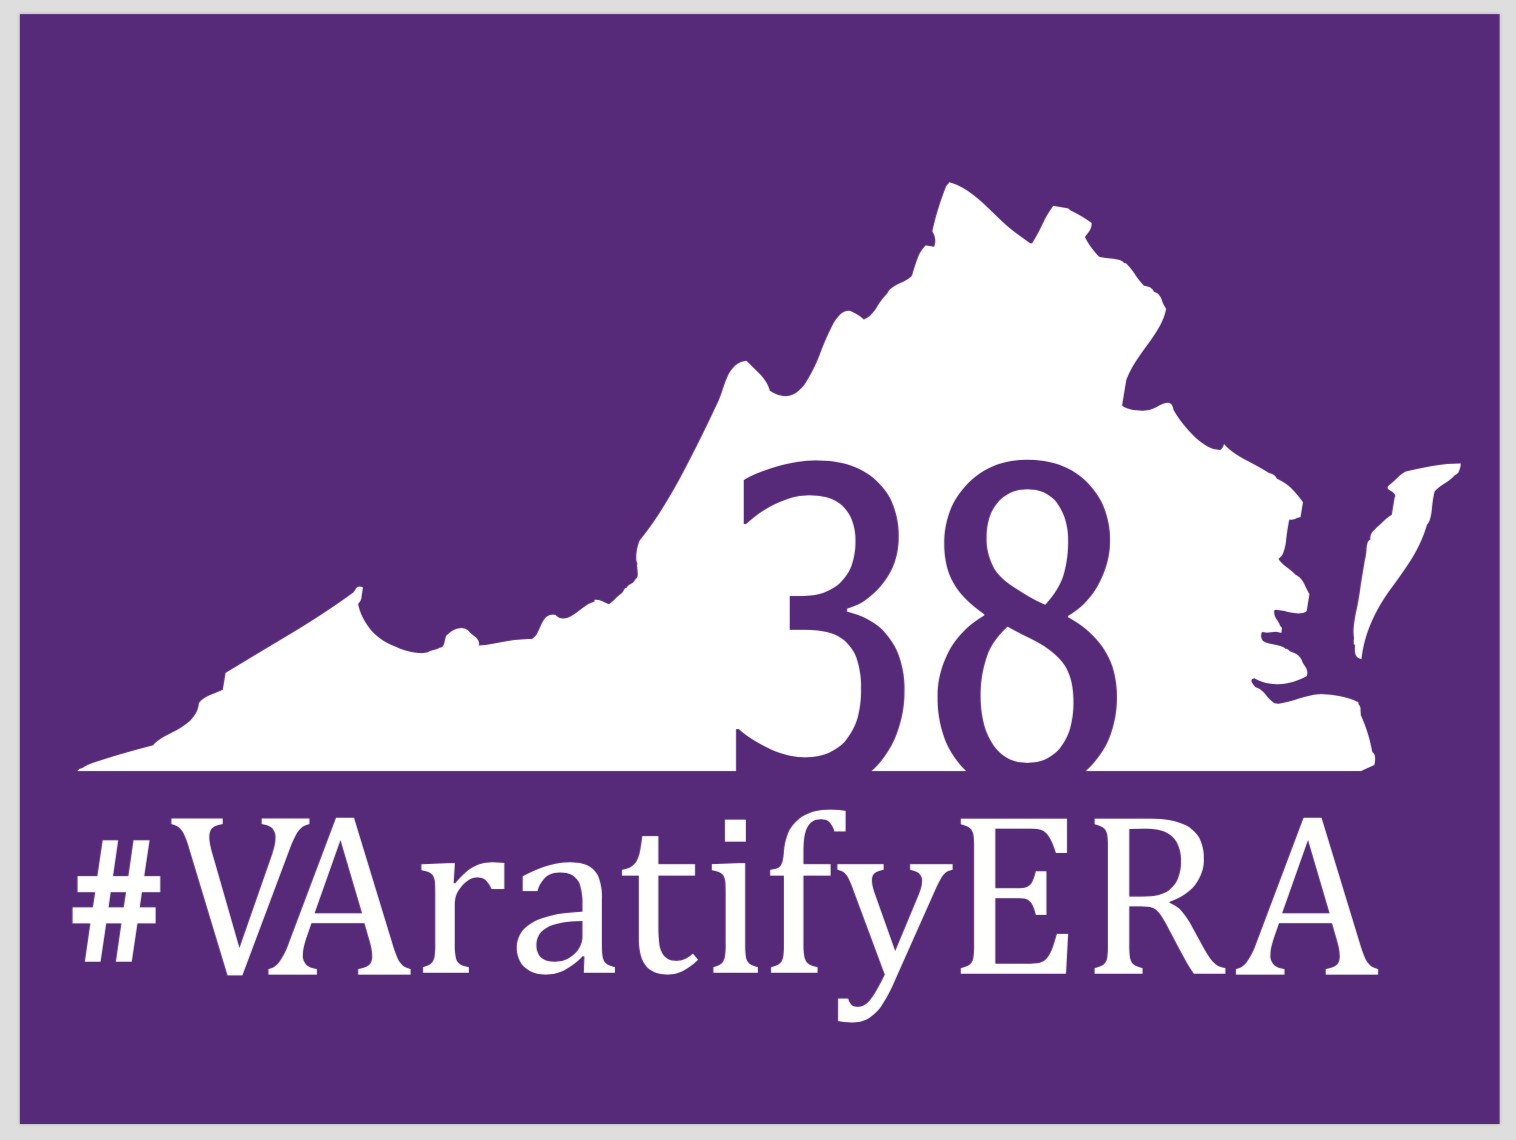 outline of Virginia with "VAratifyERA" as text and the large number 38